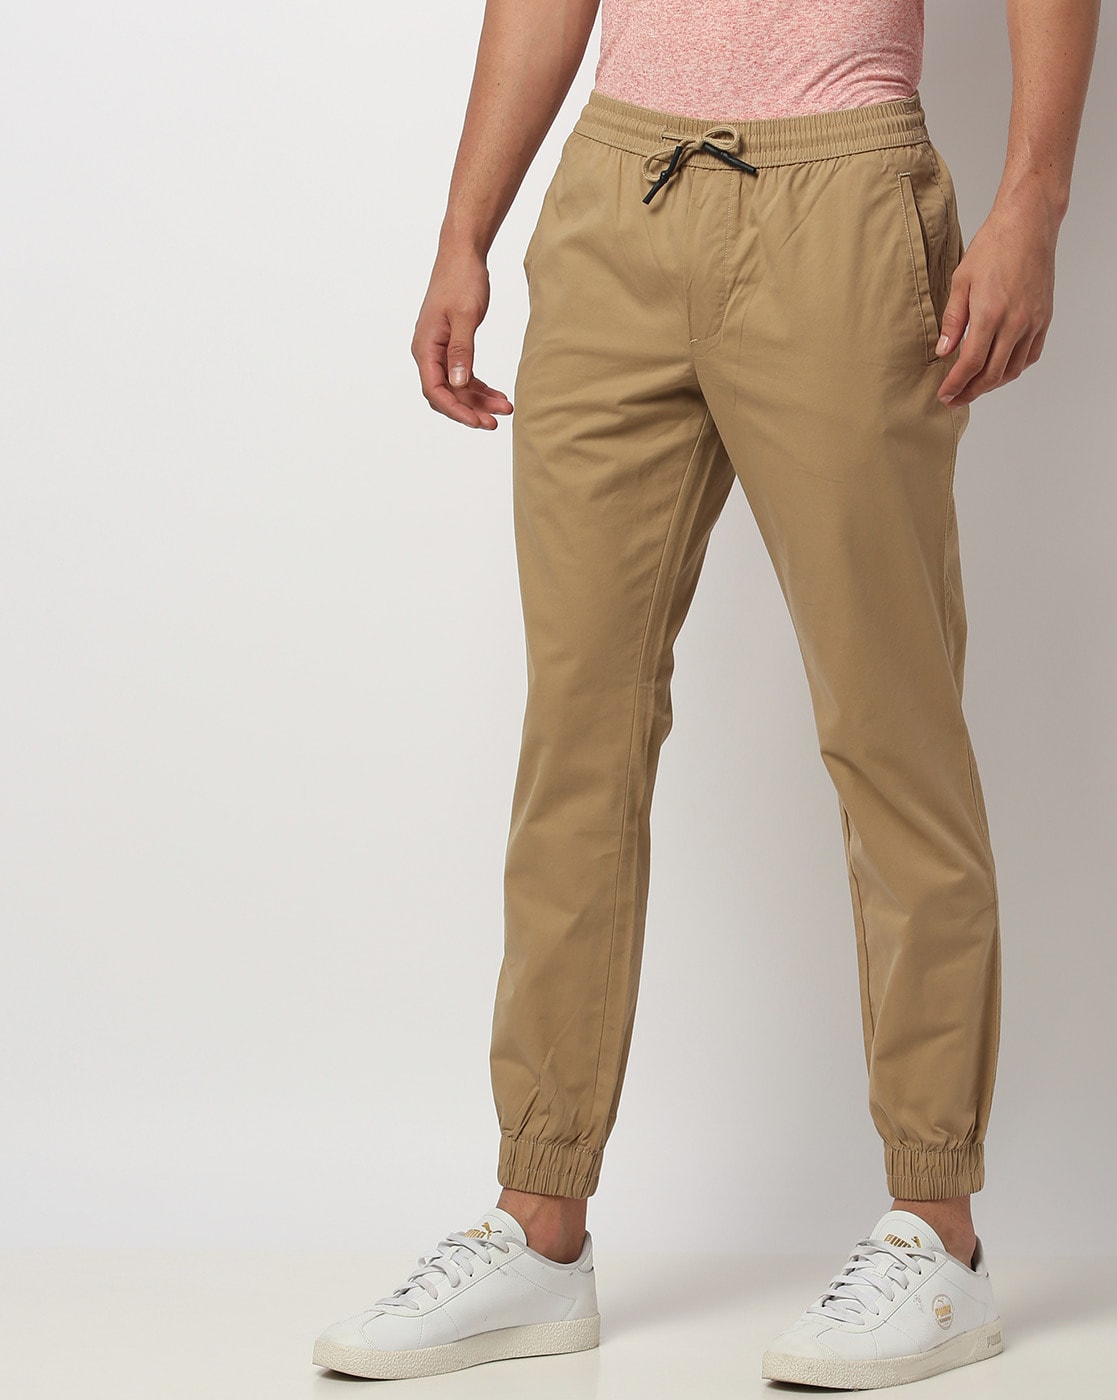 Mens Six Pocket Stretchable Joggers at Rs 390/piece